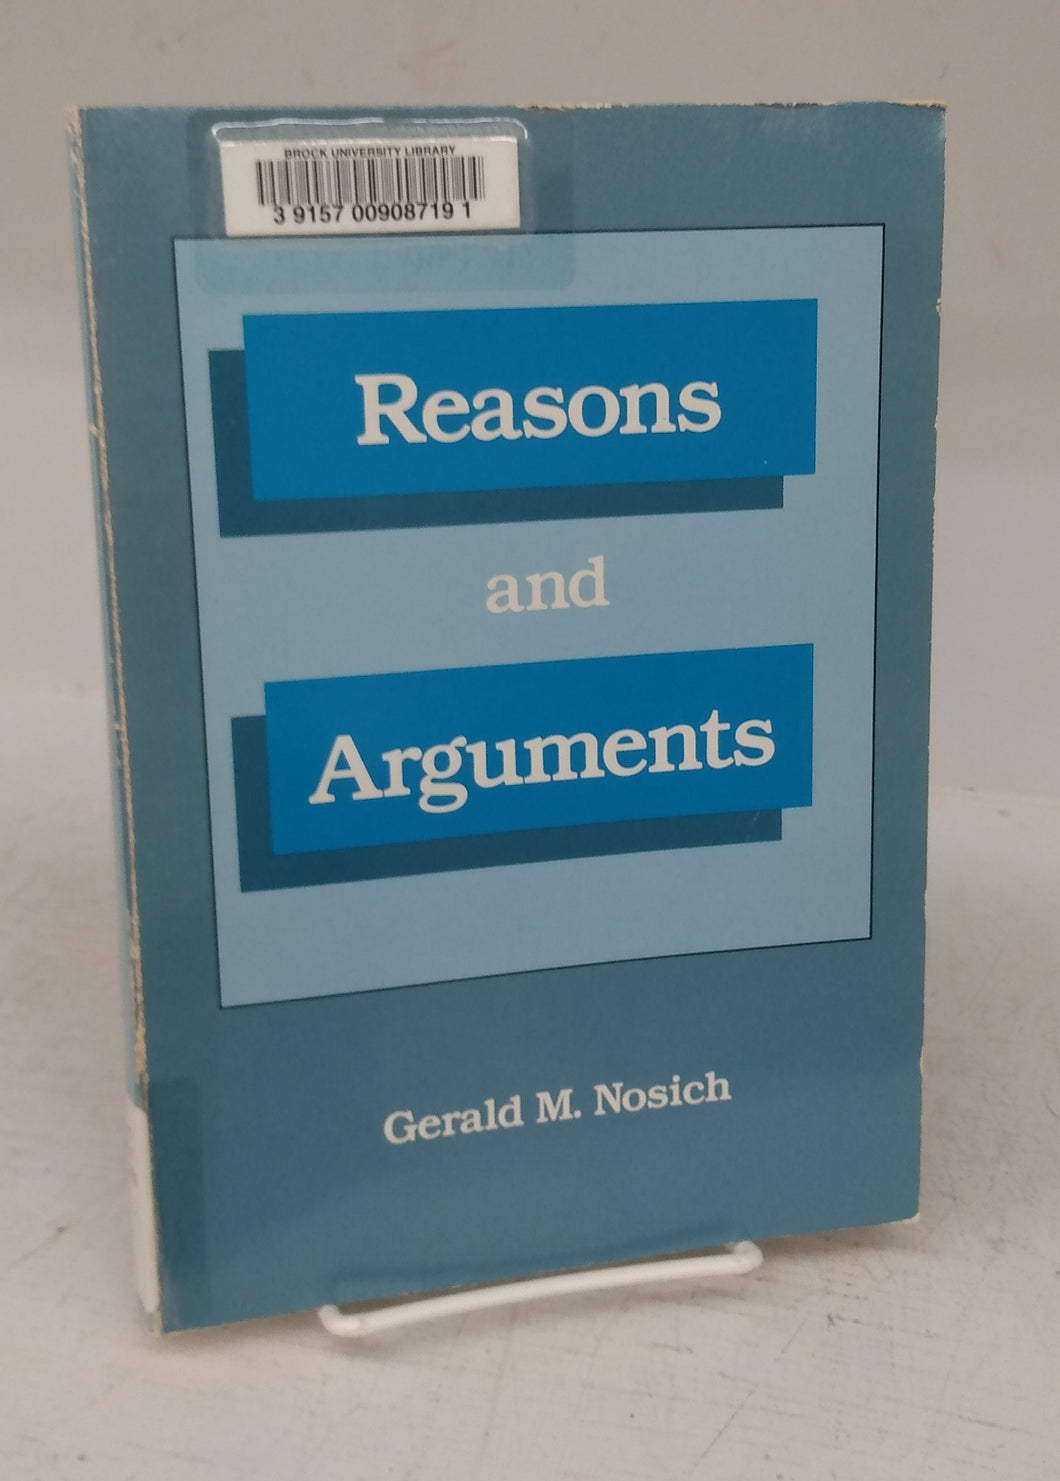 Reasons and Arguments